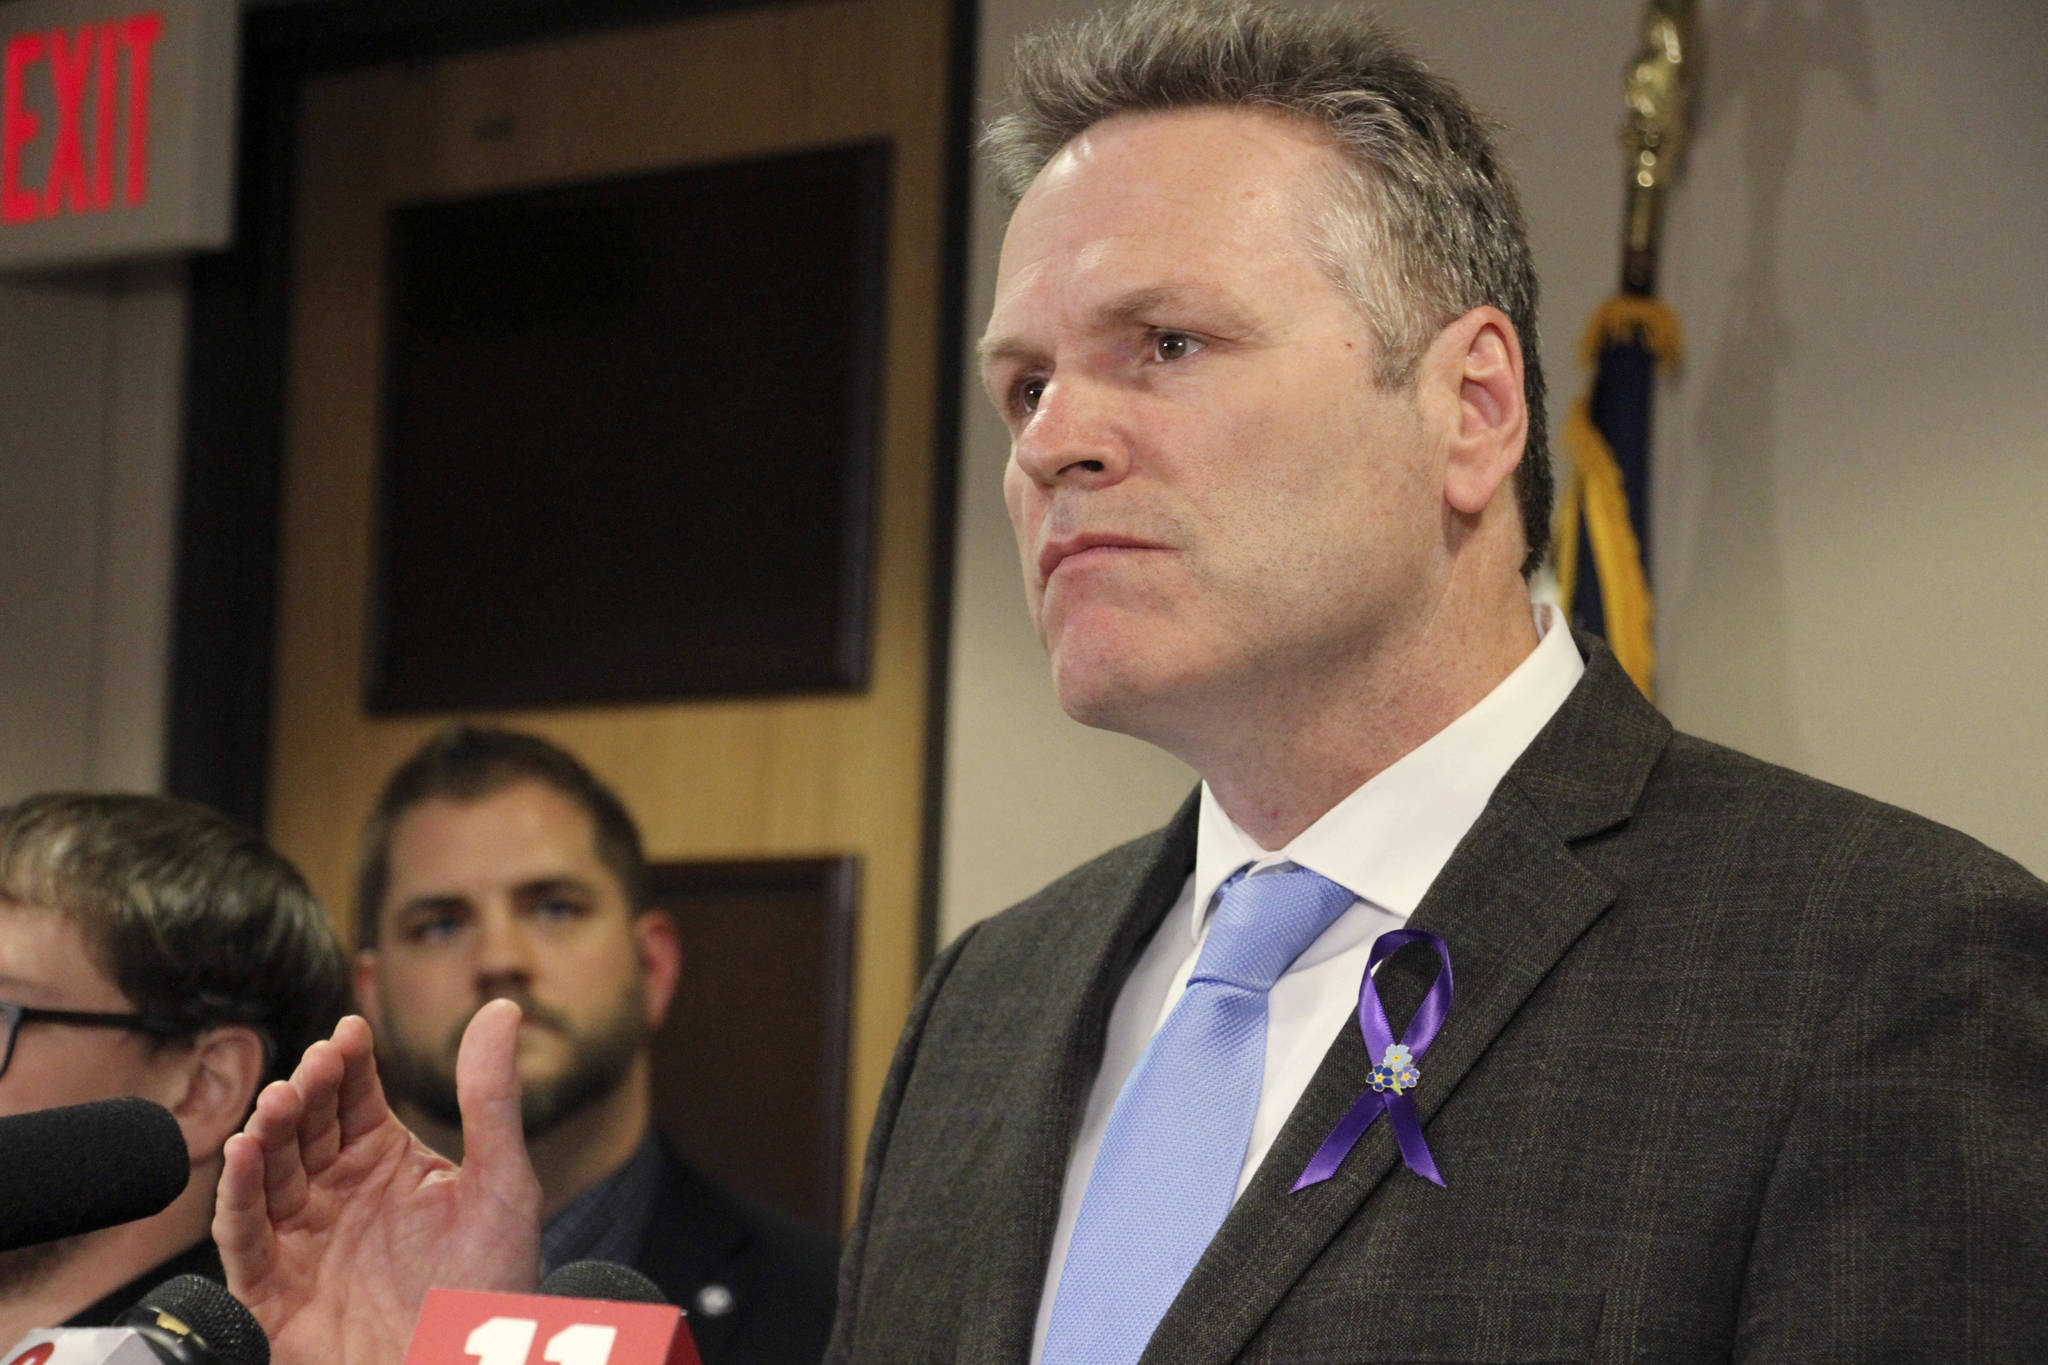 AP Photo / Mark Thiessen
Gov. Mike Dunleavy speaks during a news conference in Anchorage in March. Dunleavy faces criticism for his handling of COVID-19, from those who think he’s not doing enough to address rising case counts to those who think he’s been overreaching.